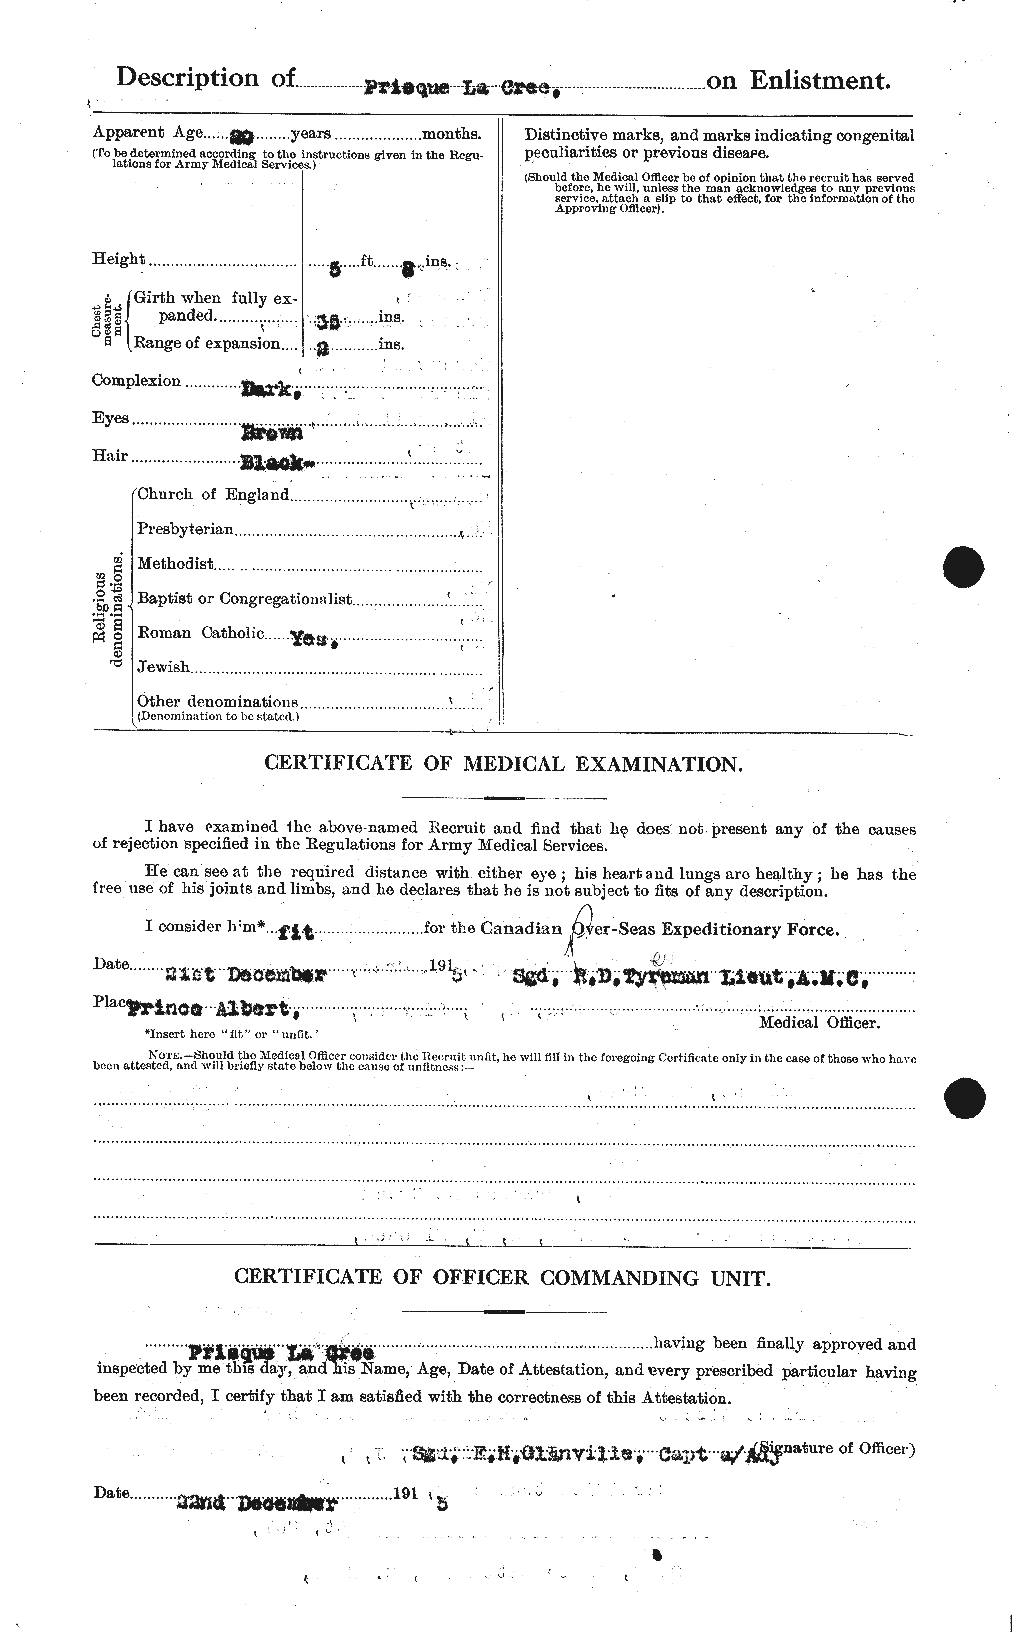 Personnel Records of the First World War - CEF 442221b